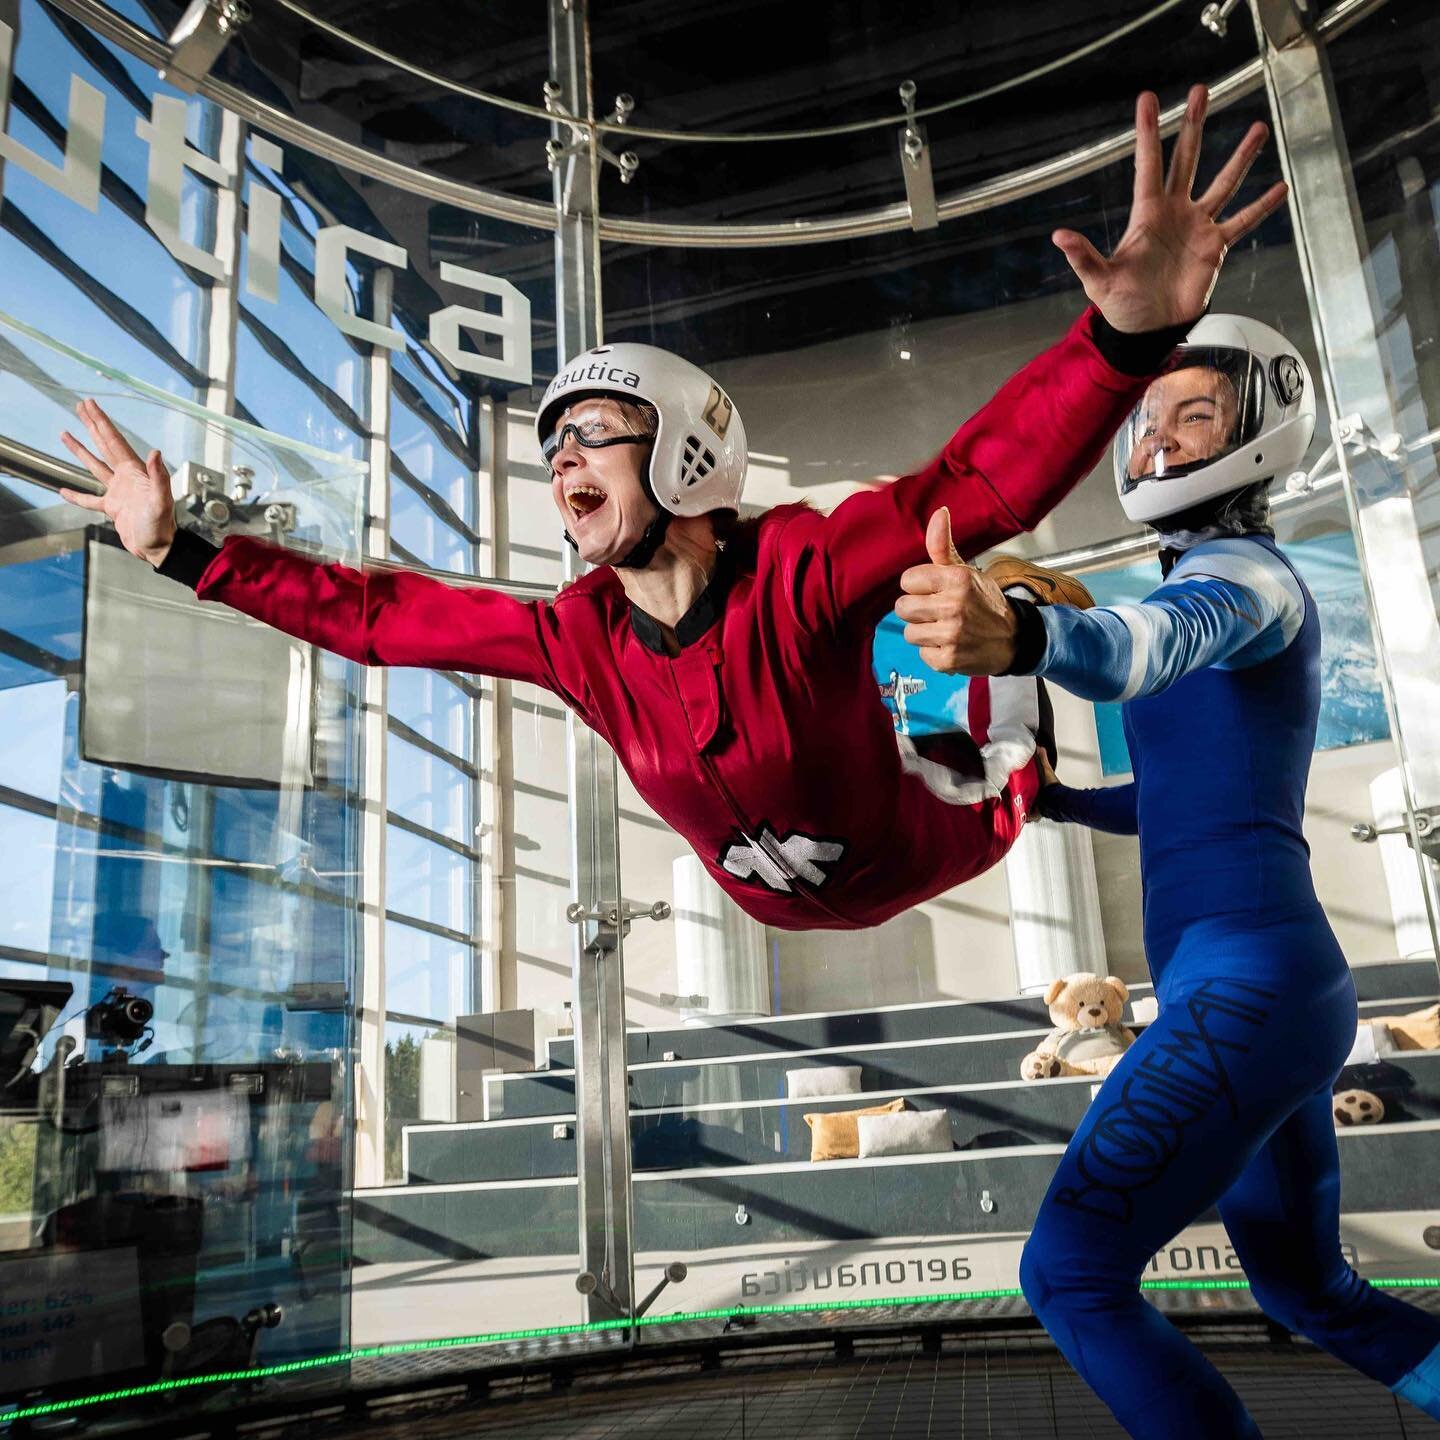 WELCOME TO THE INSTRUCTOR LIFE!

Have you been (even secretly) dreaming of becoming a tunnel instructor? This is your chance to take the first step and see what you are made of! 

WHAT? Level 1 @aerodium tunnel instructor course = Class A Spotter

WH